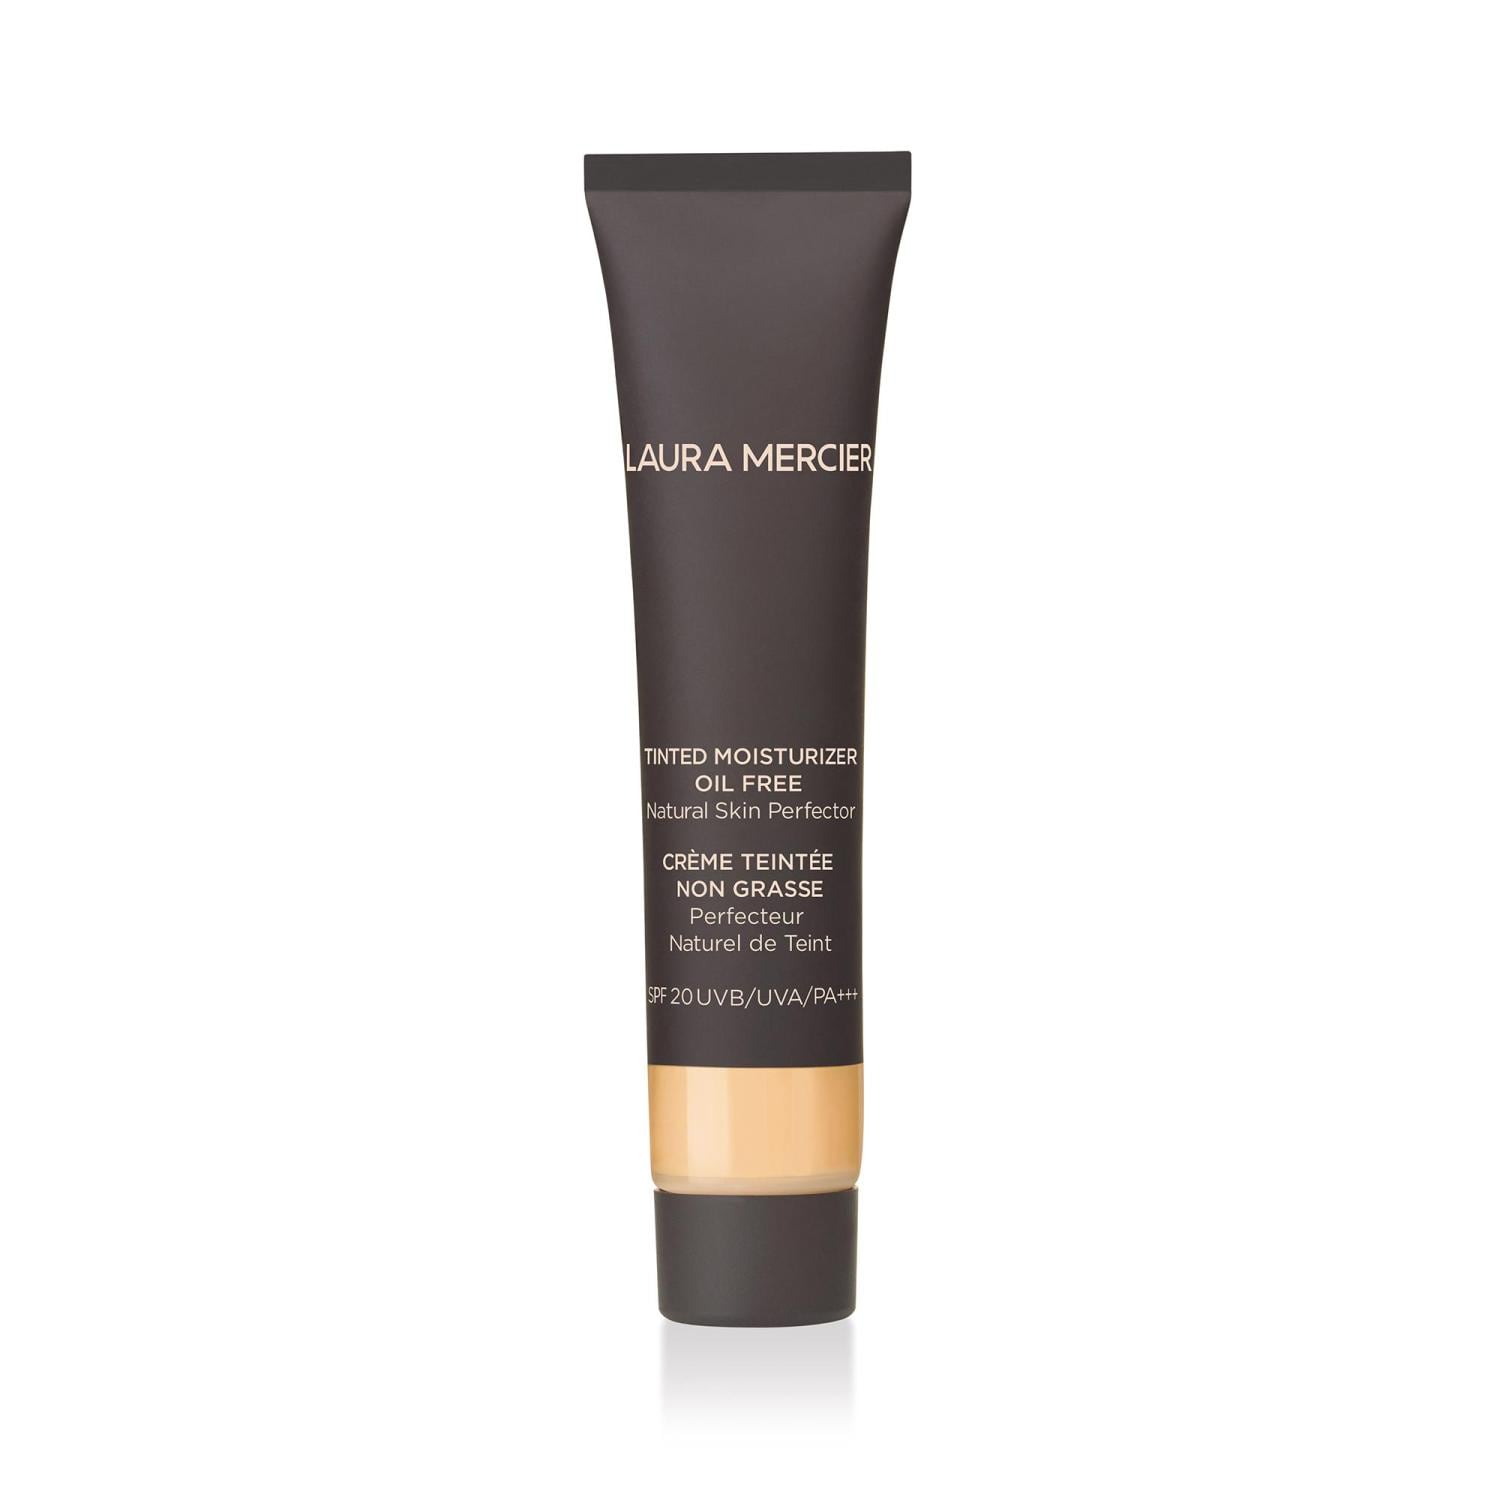 Laura Mercier Beauty To Go Tinted Moisturizer Oil Free Natural Skin Perfector SPF 20 - Travel Size, No. 1W1 - PORCELAIN